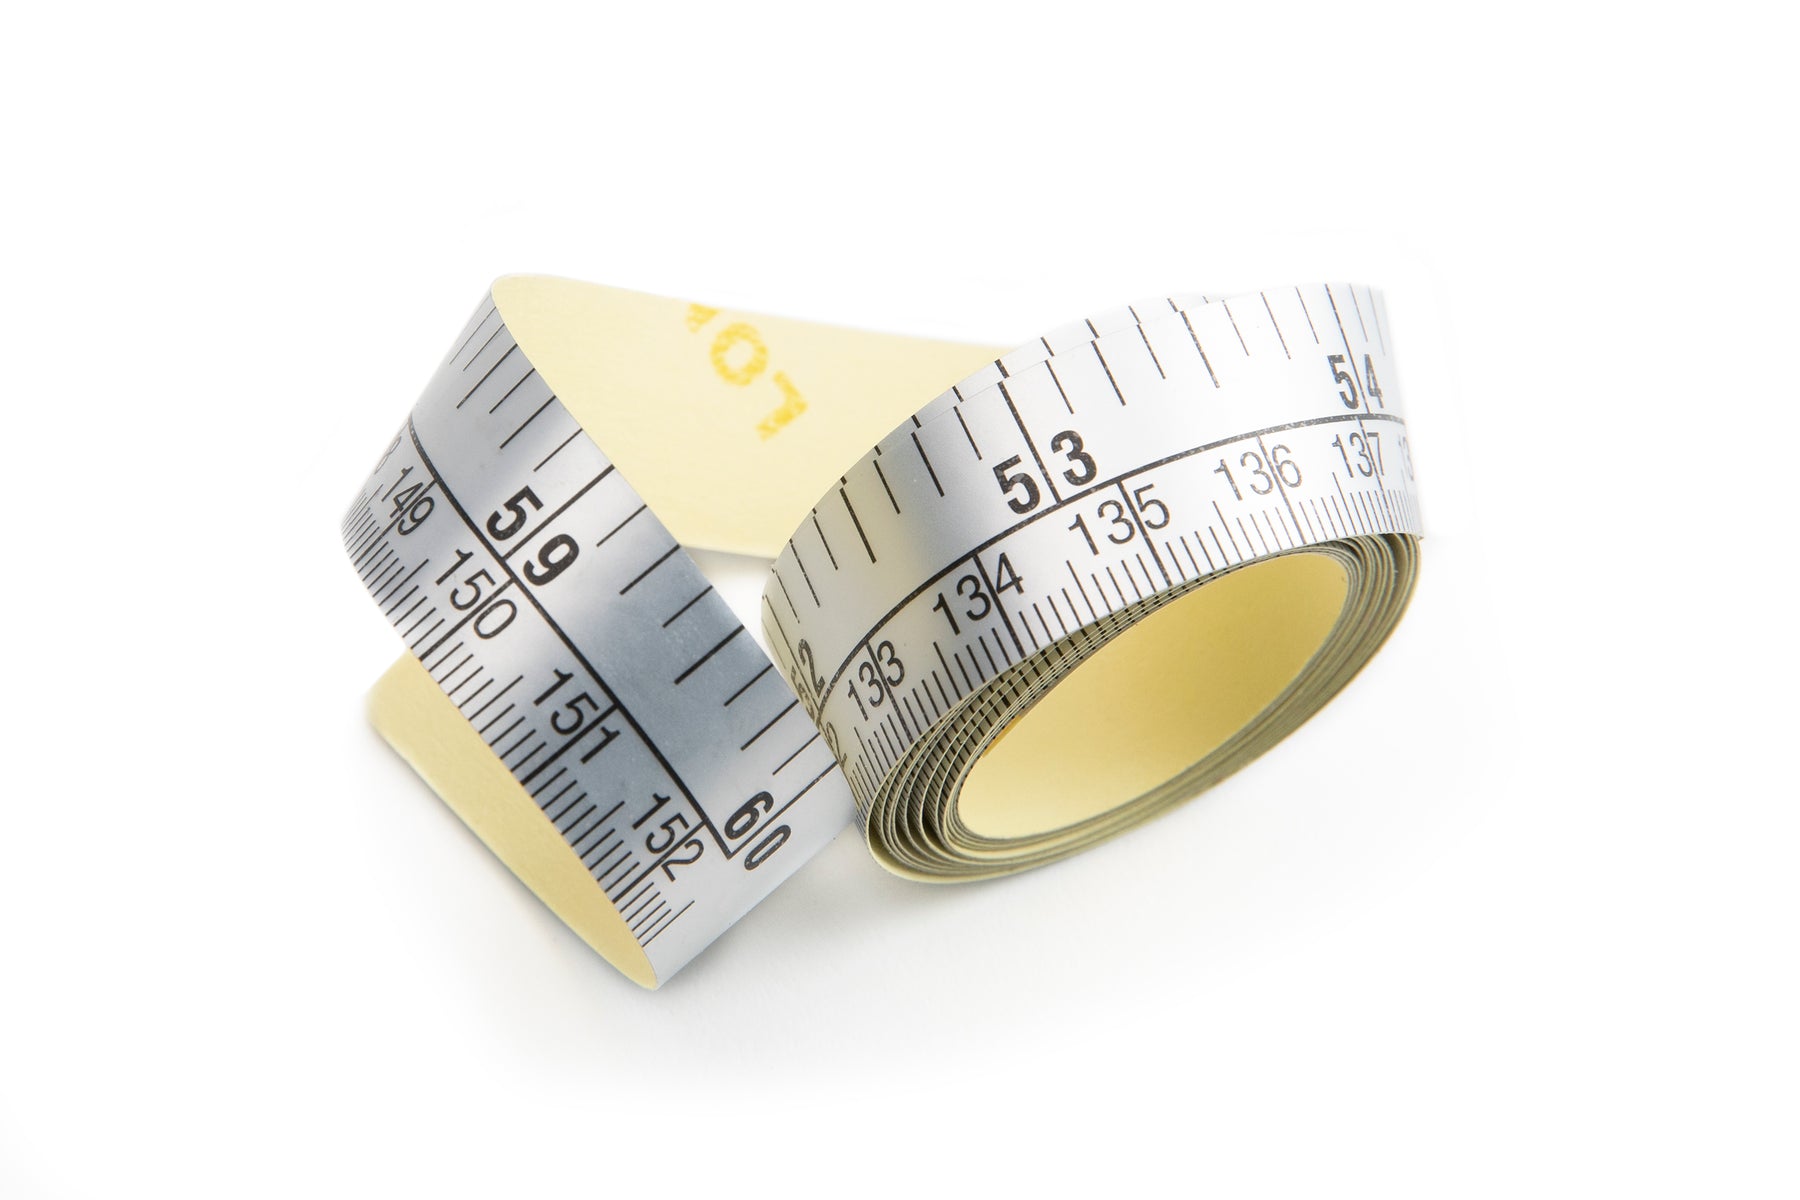 Shop Metric Inch Tape Measure with great discounts and prices